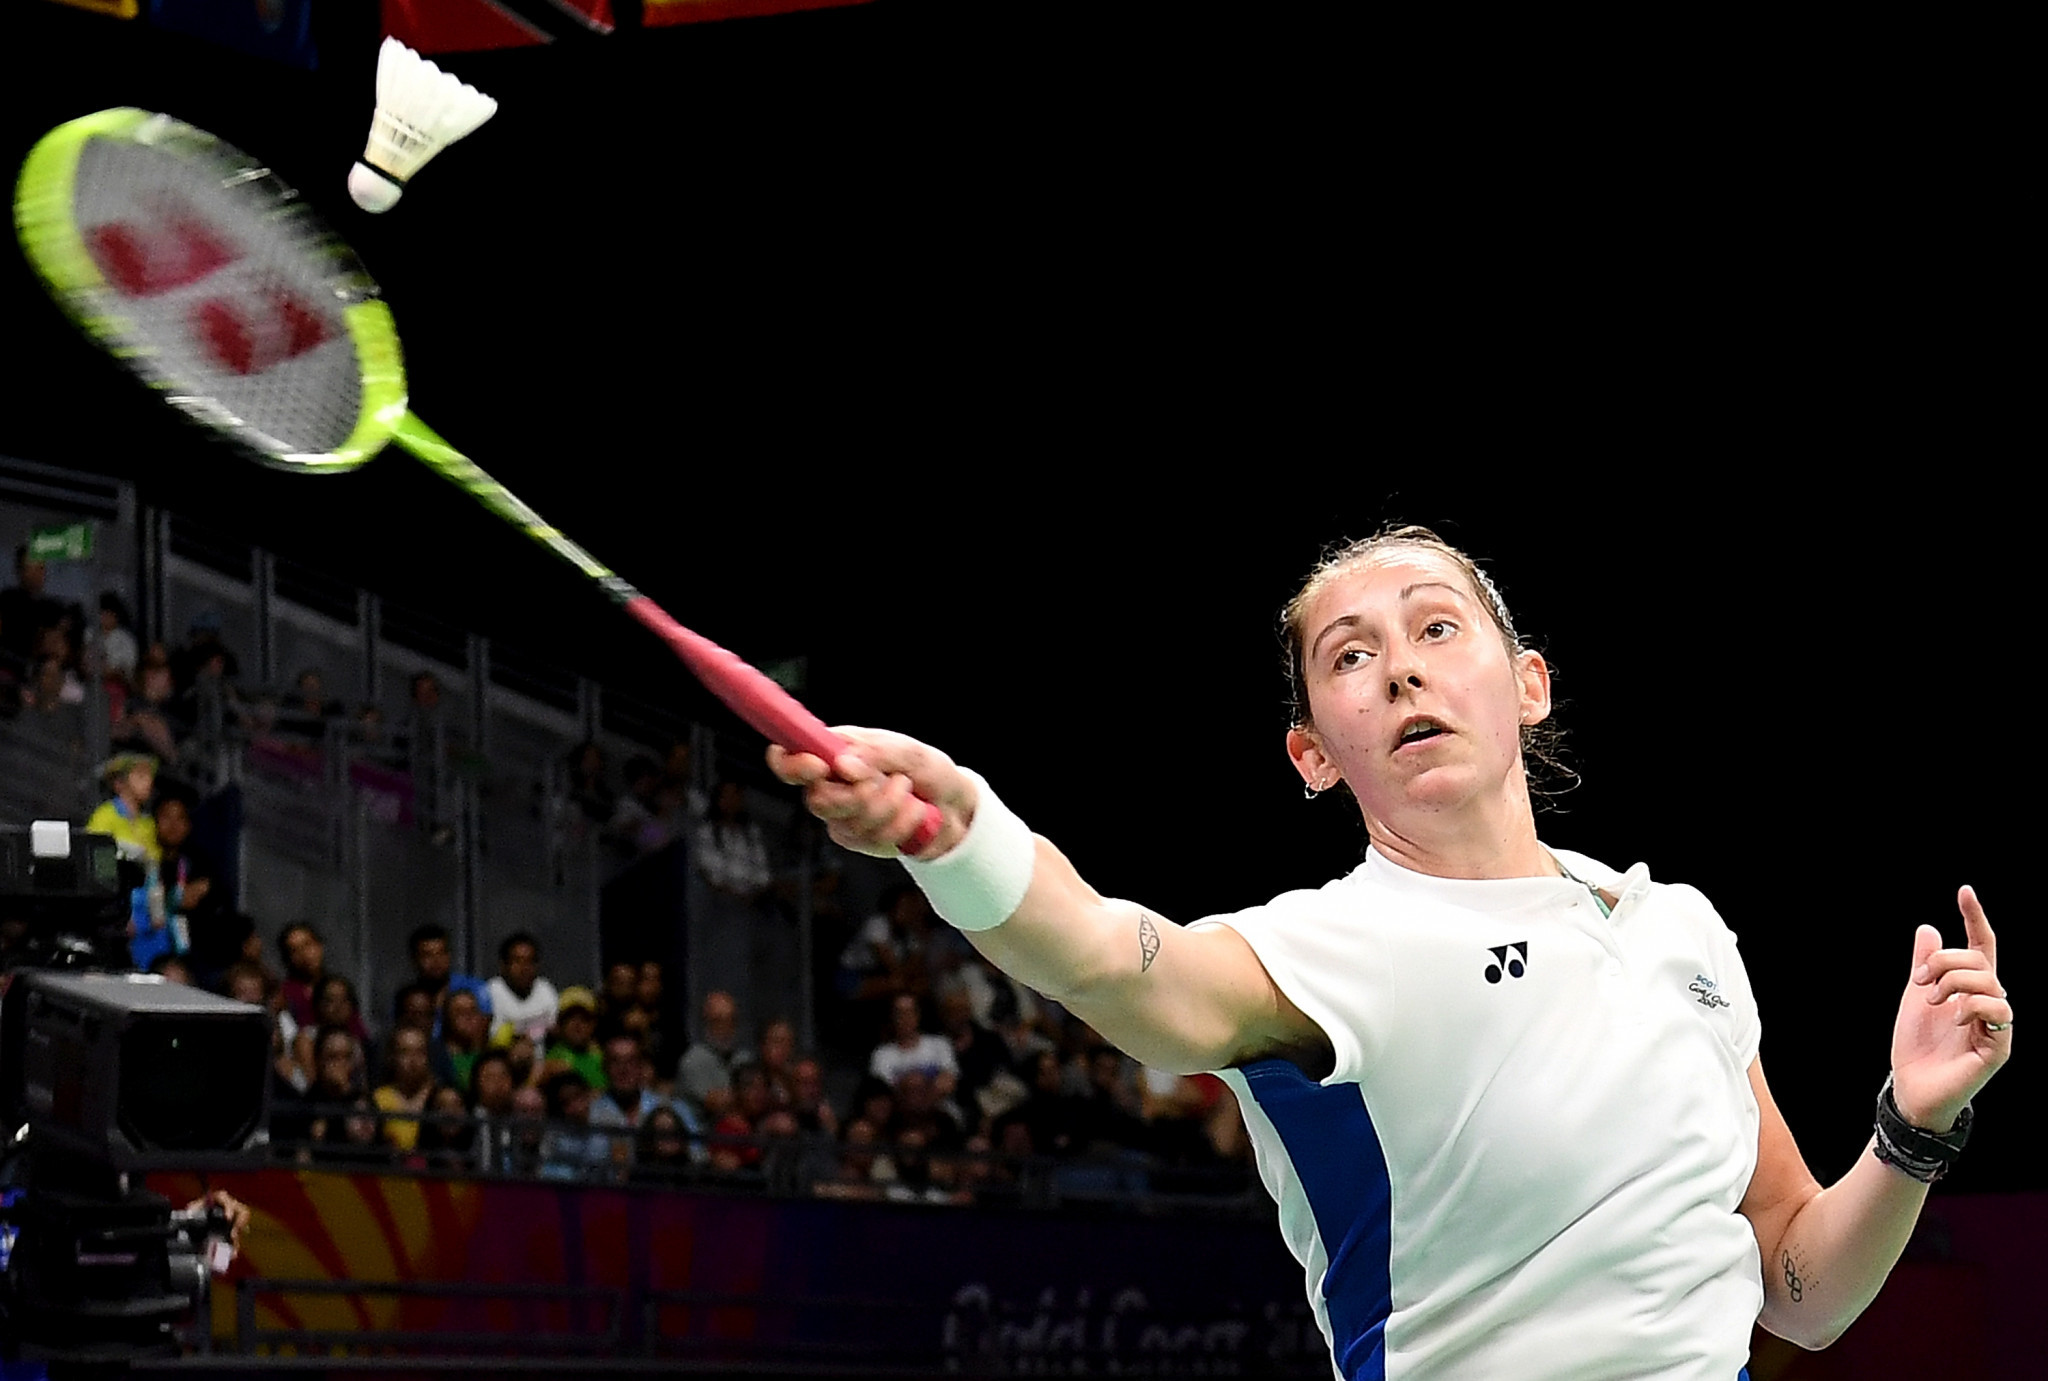 Scotland's Kirsty Gilmour is the top seed in the women's singles event ©Getty Images